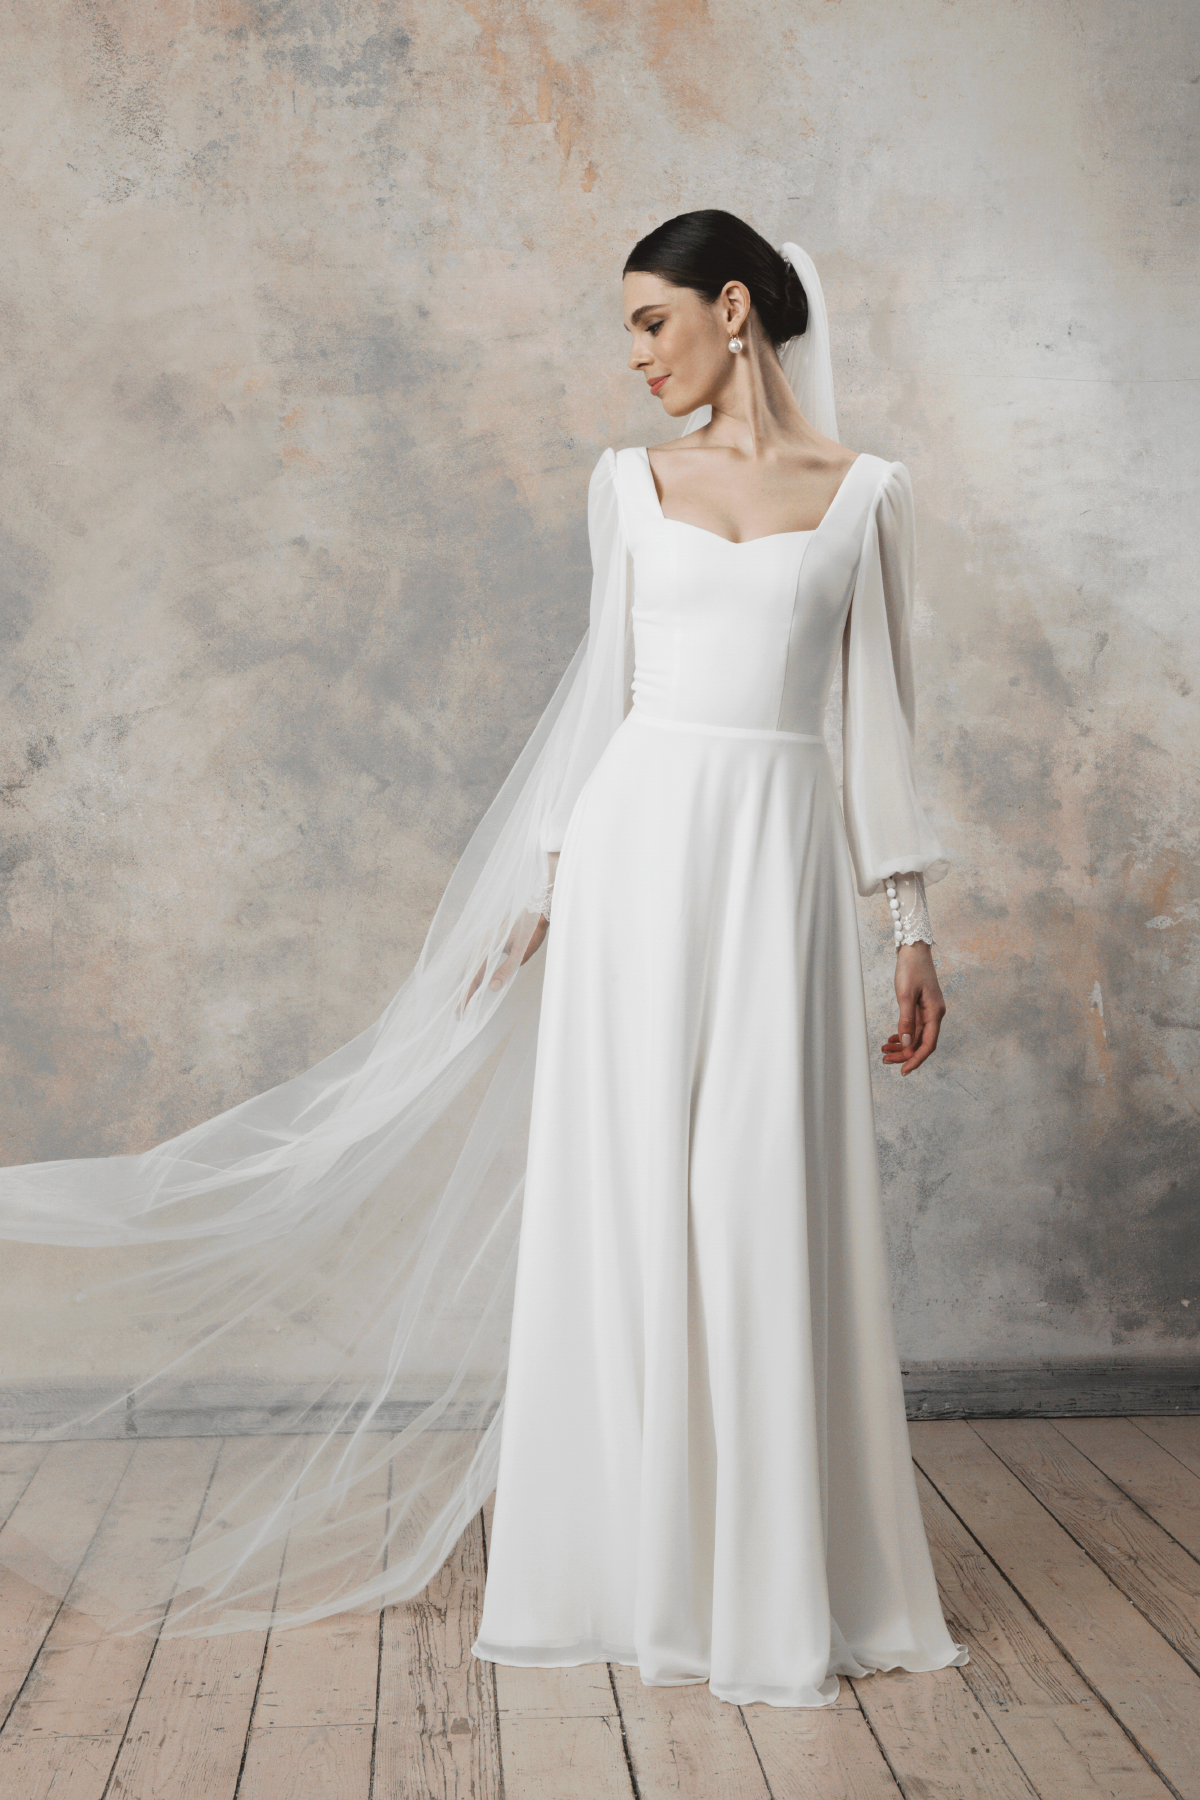 Simple and elegant wedding dress with long sleeves